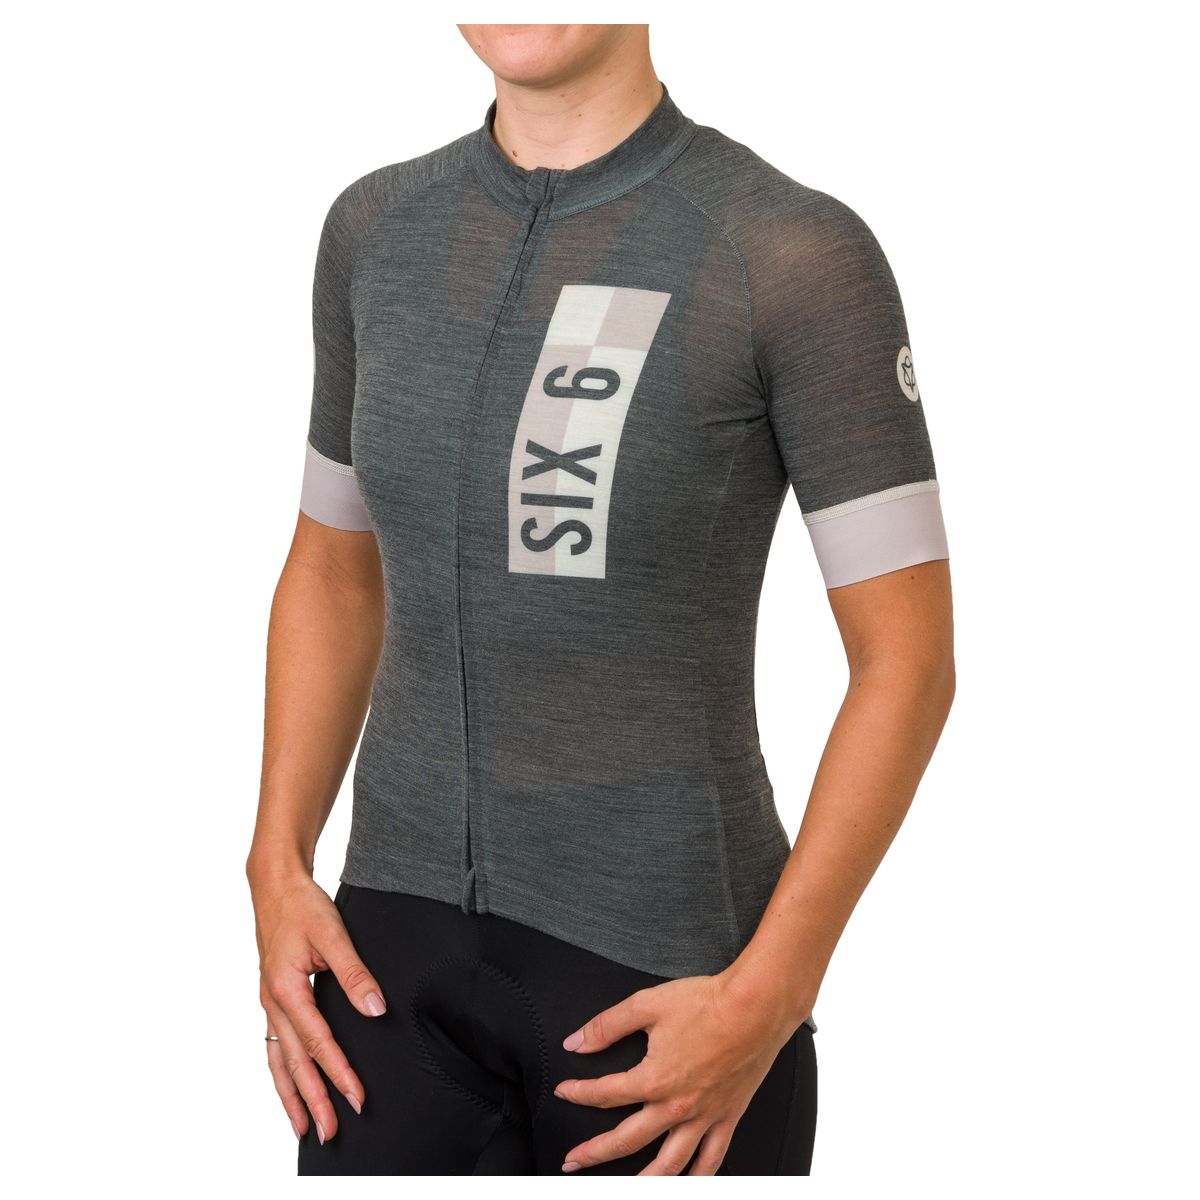 Solid Merino Maglia III SIX6 Donne fit example